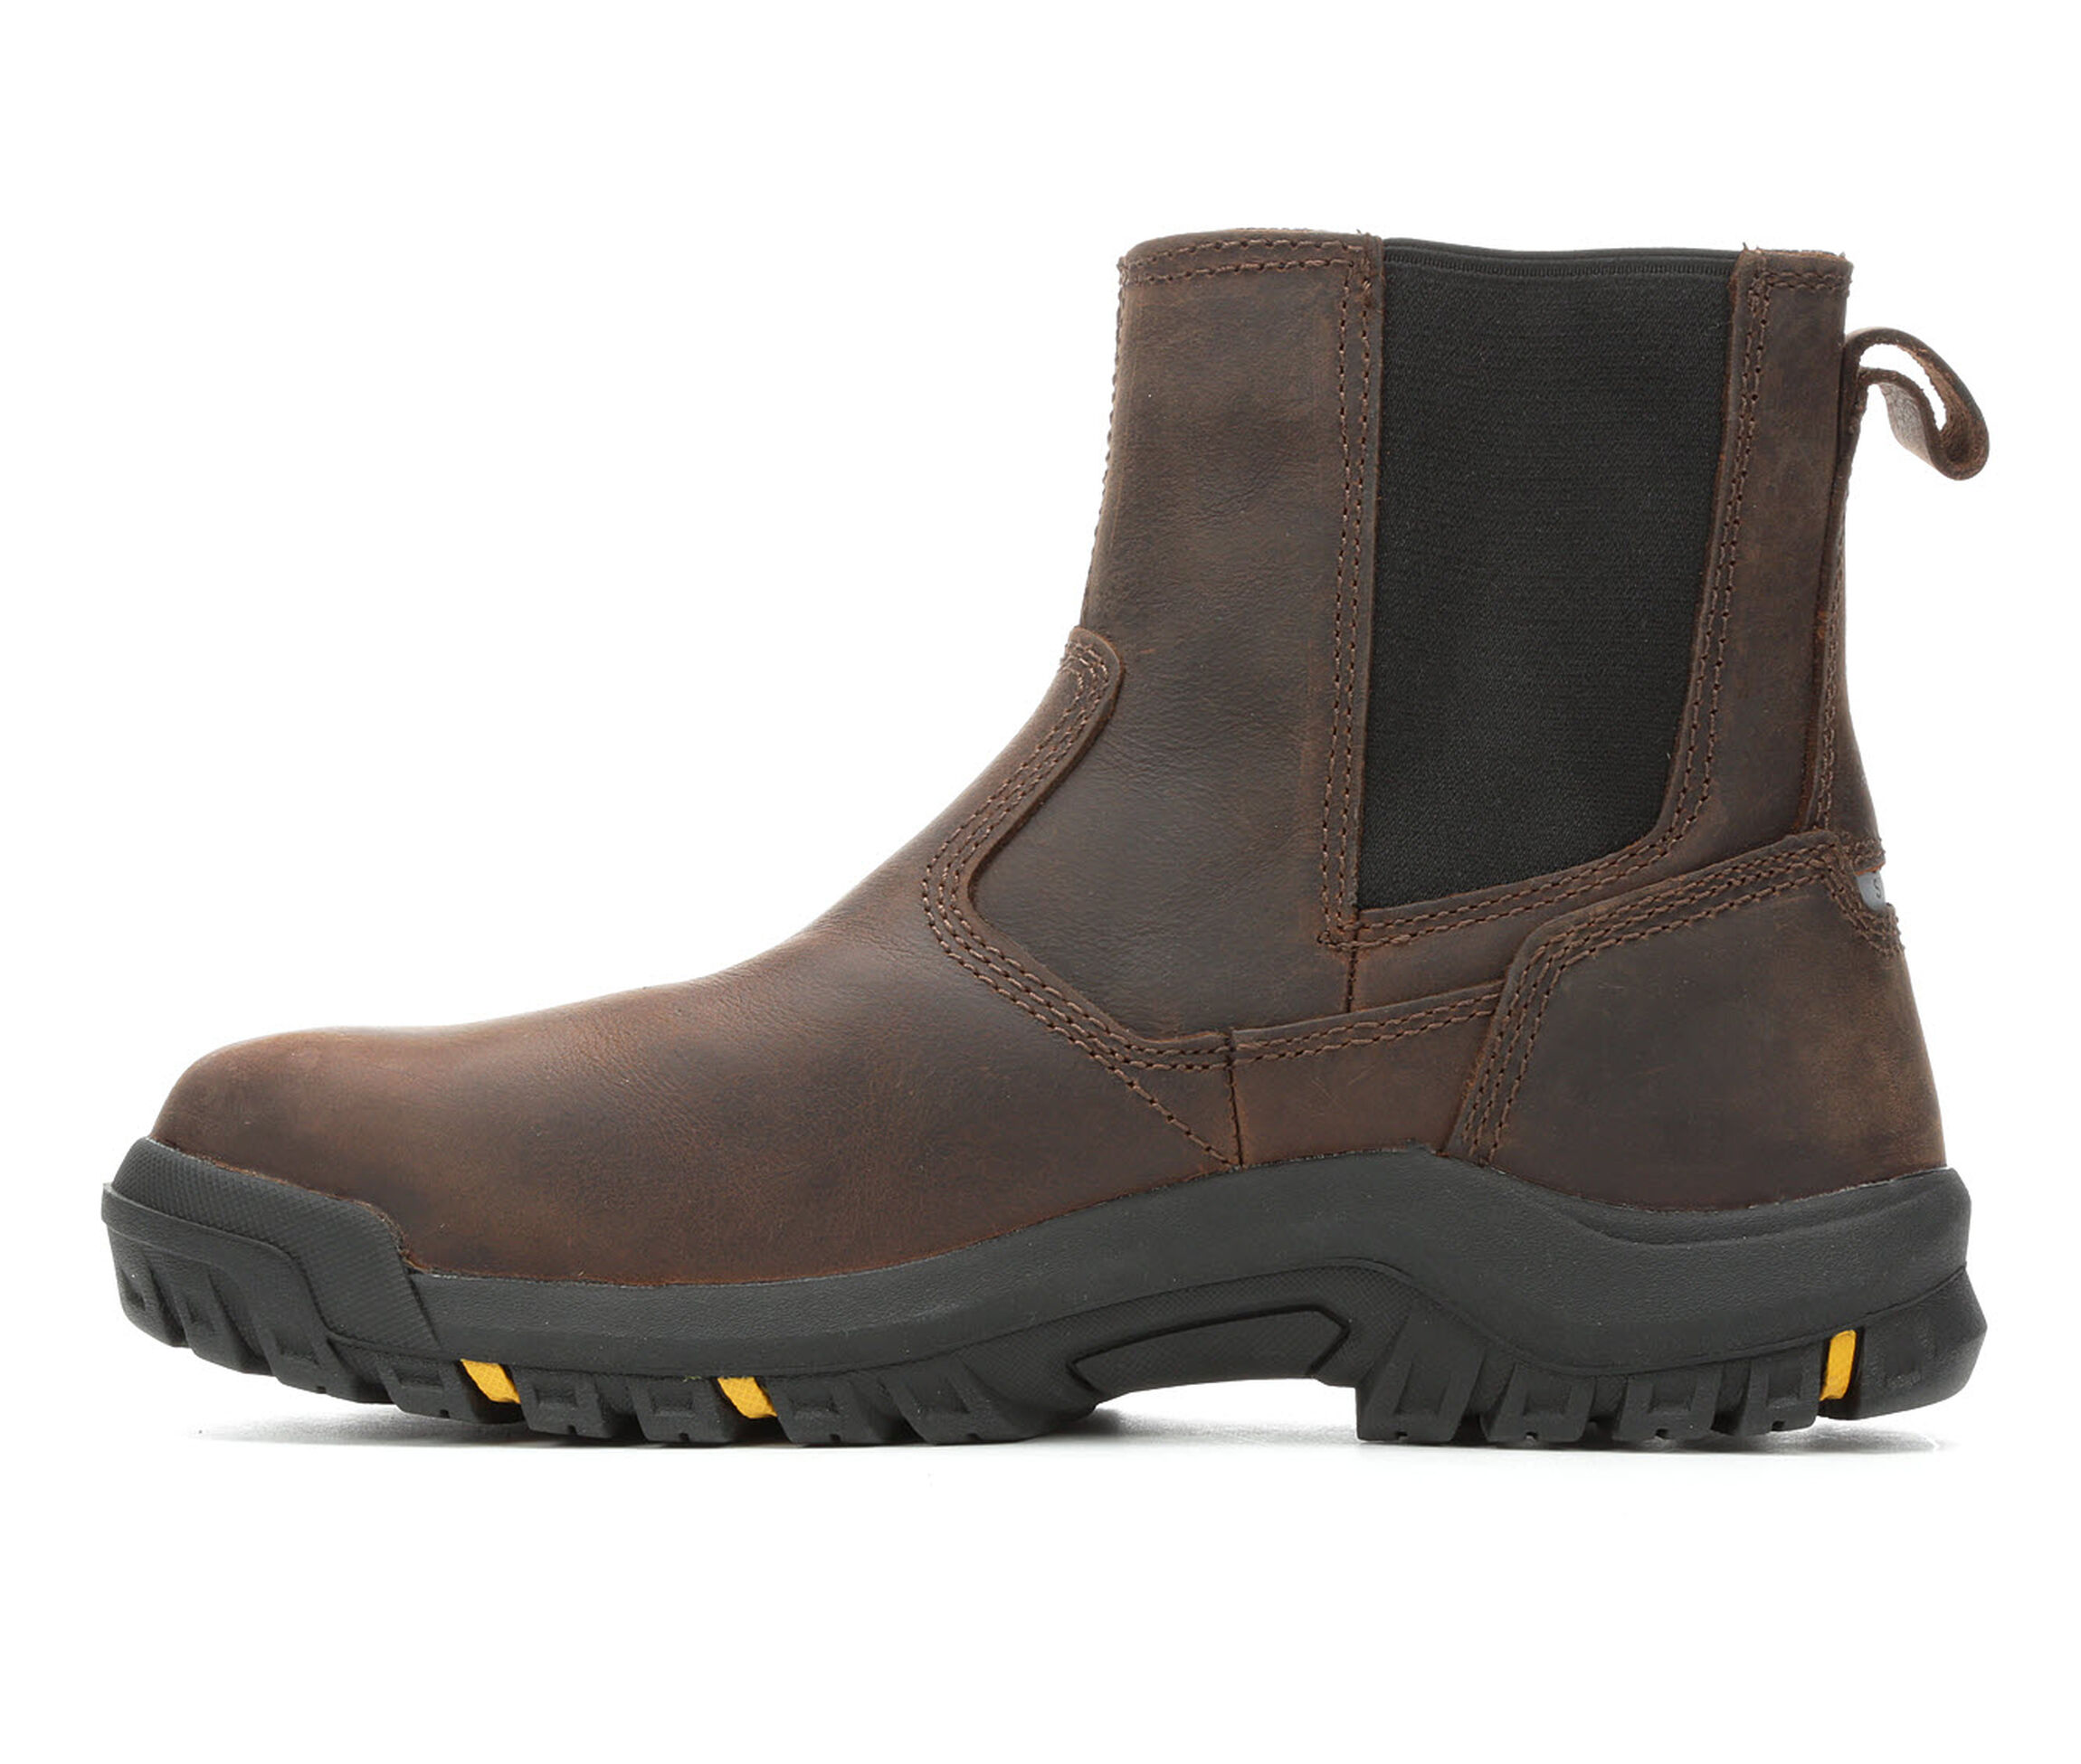 Caterpillar Work Boots & Shoes | Shoe Carnival